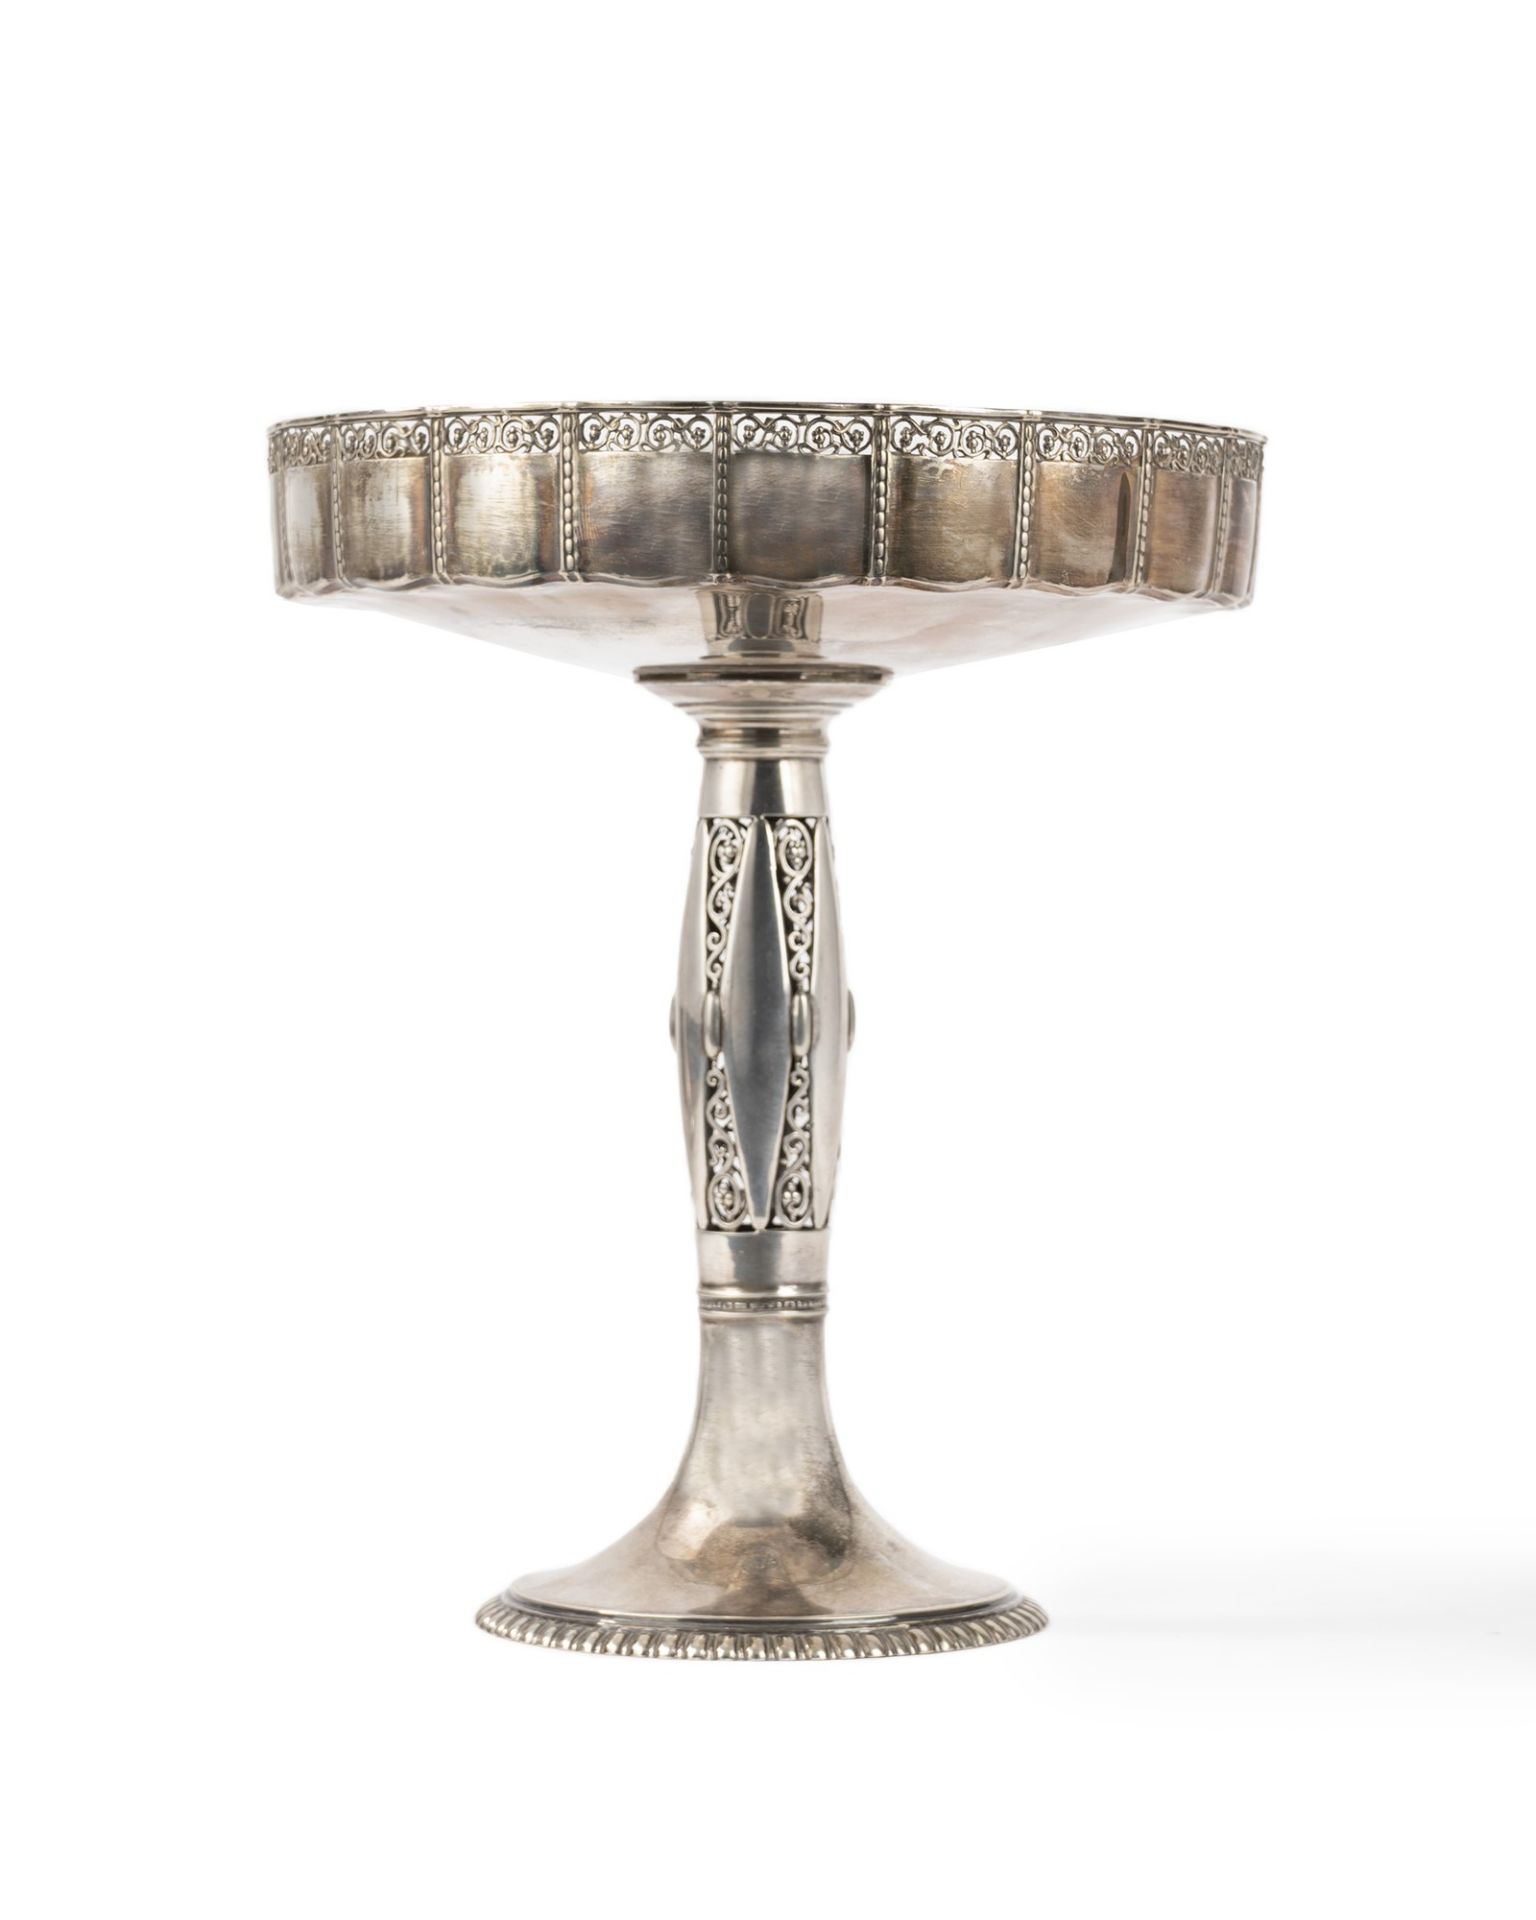 Embossed, pierced and chiseled silver stand, Germany, early 20th century